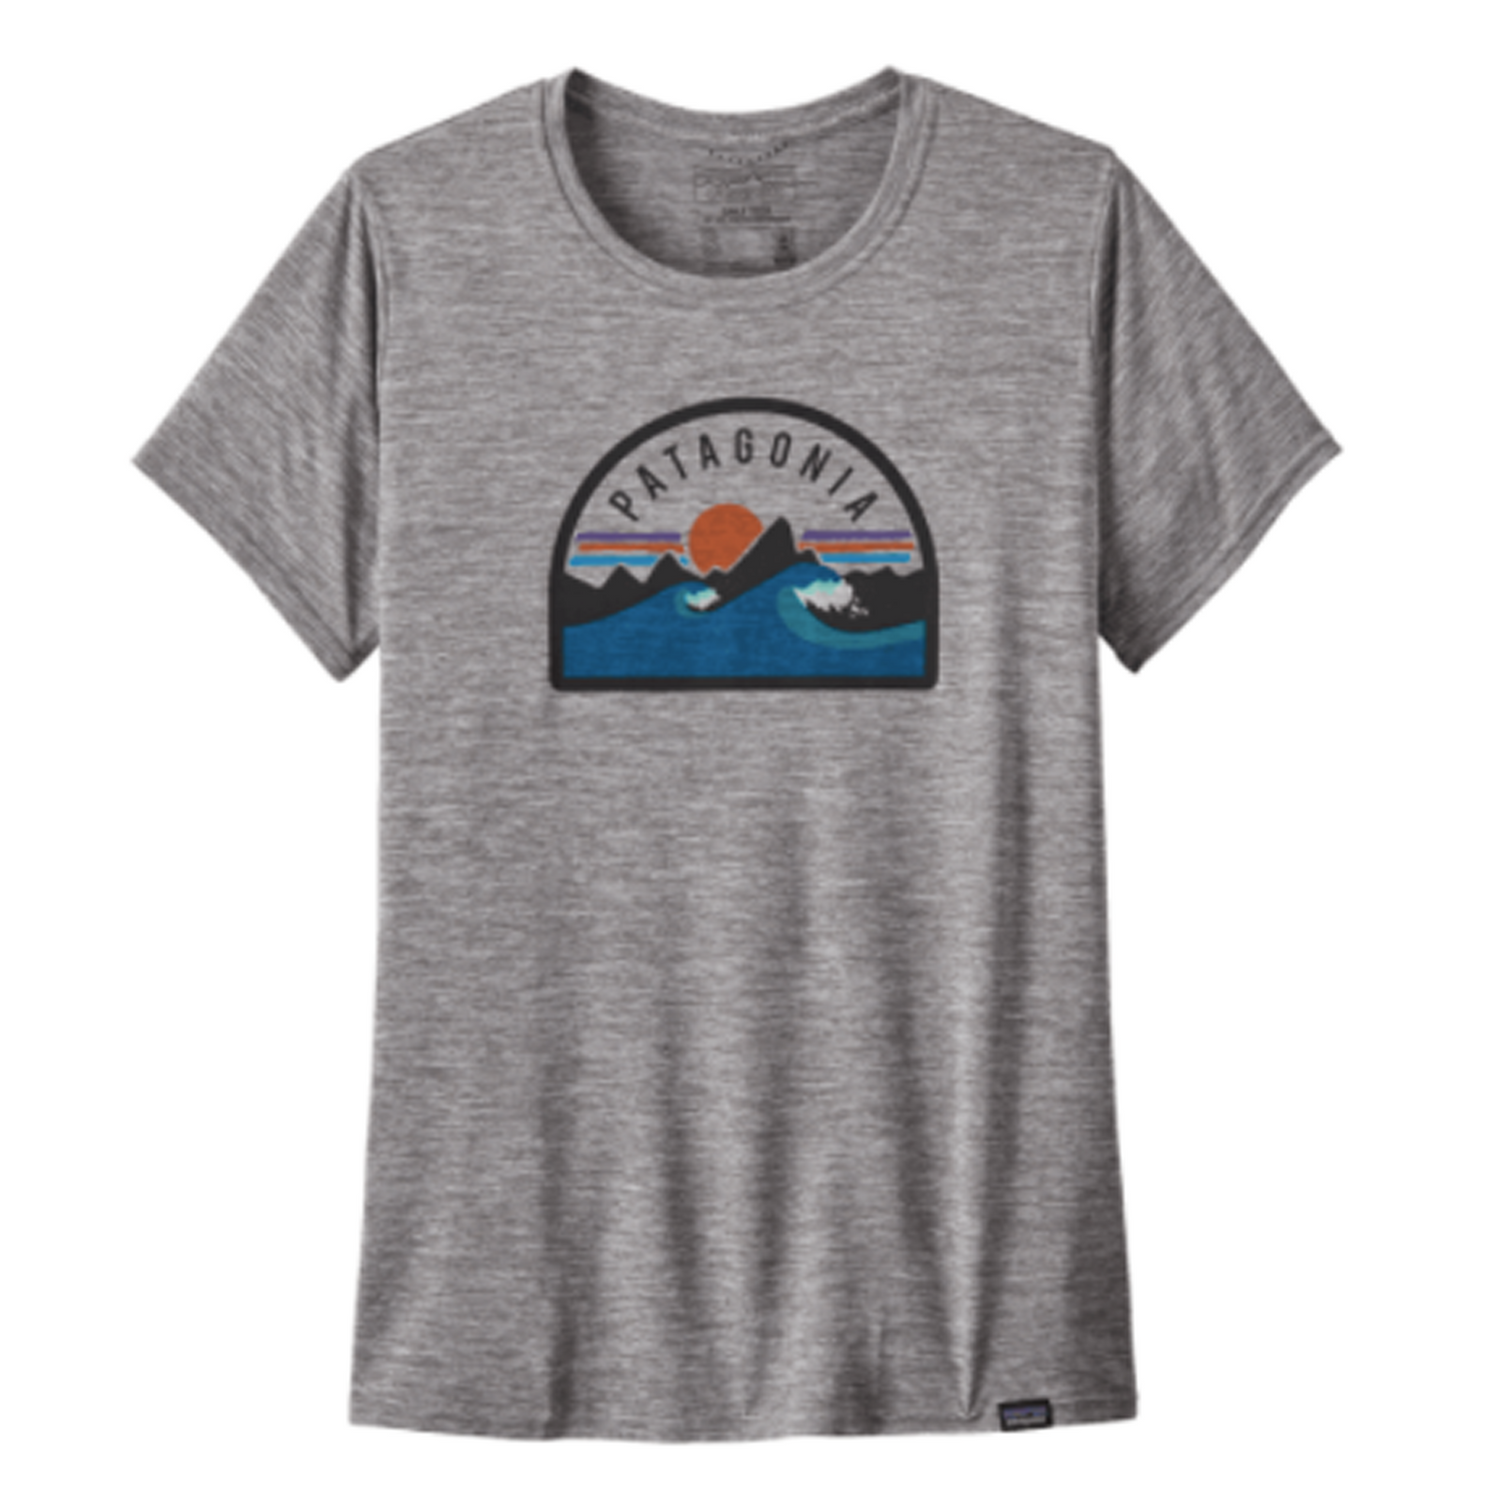 Patagonia Women's cap cool daily graphic t-shirt with a wave scene on the front and in the colour grey.